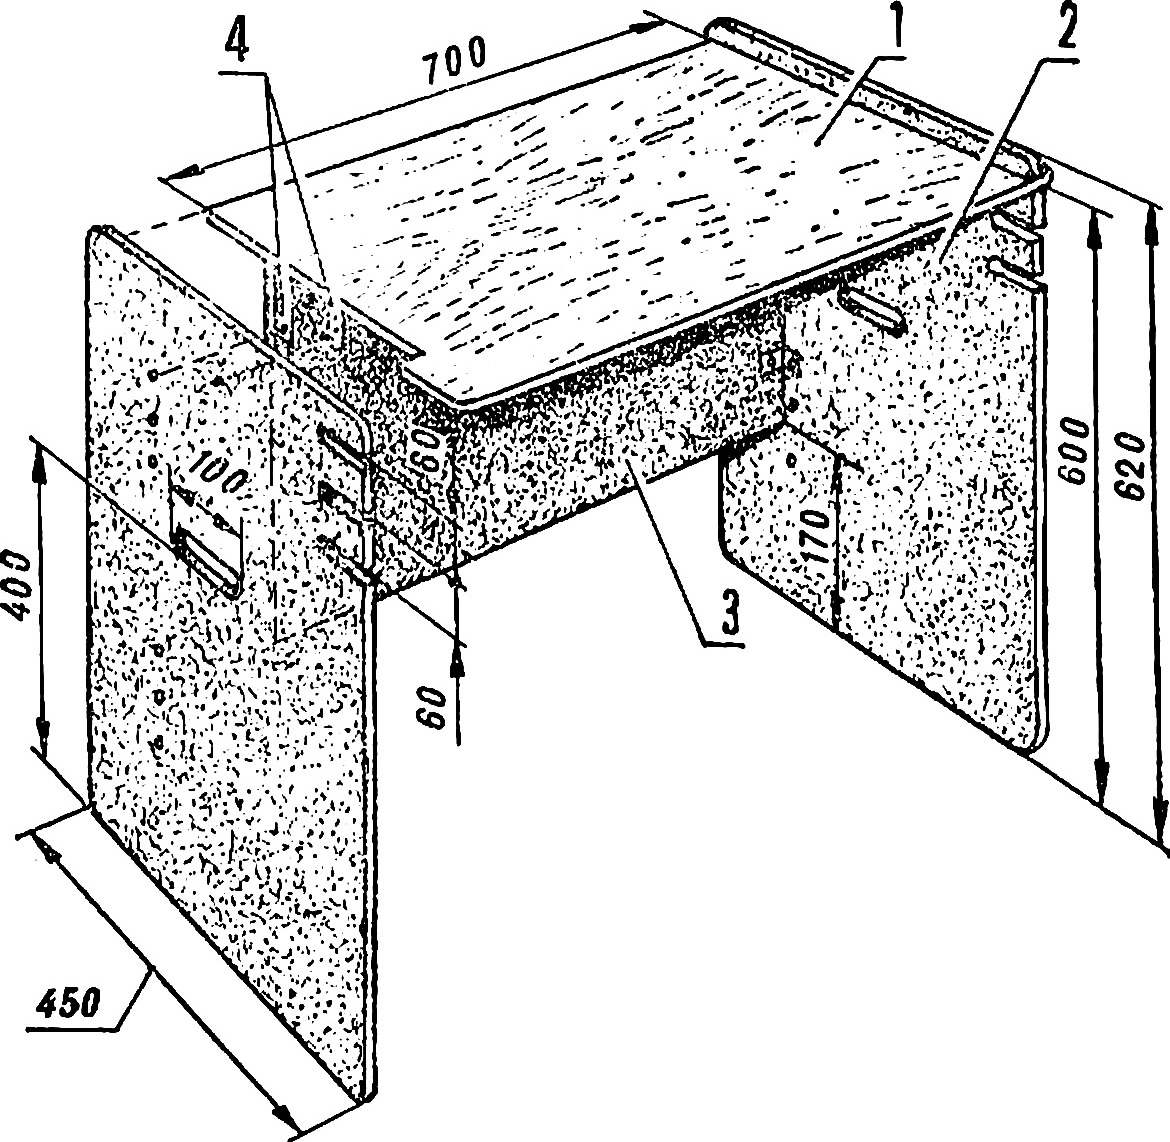 Fig. 6. The table.